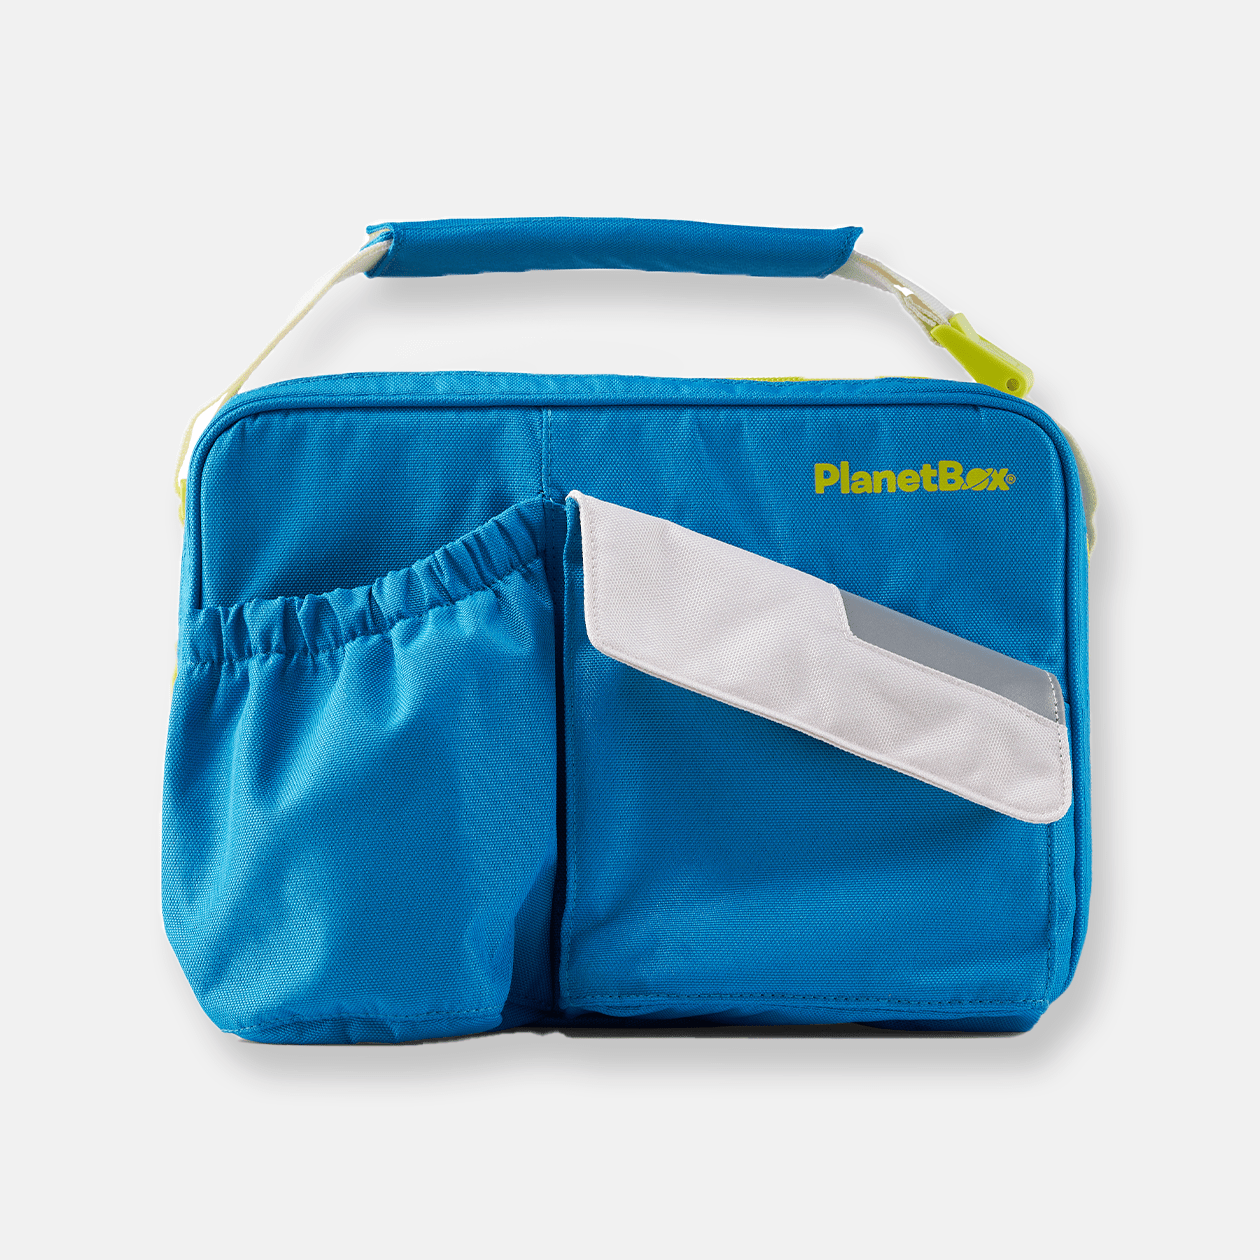 PlanetBox Carry Bag - The Lunchbag That Nestles Your Lunchbox Ocean